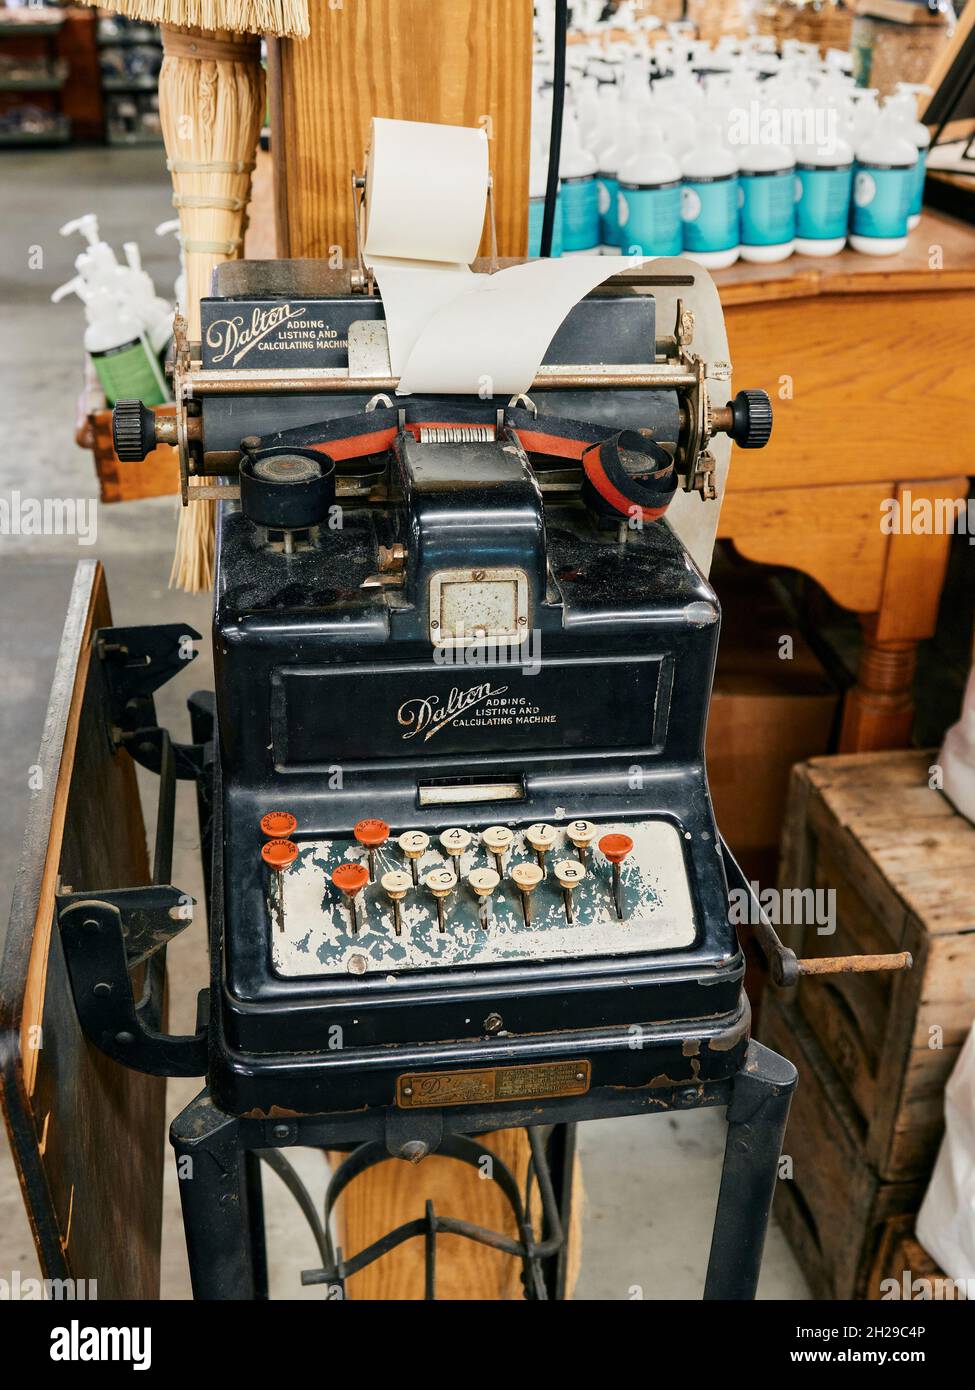 Antique Dalton Adding Listing and Calculating Machine, built in the early 1900's on static display in a farmer's market in Ellijay Georgia, USA. Stock Photo